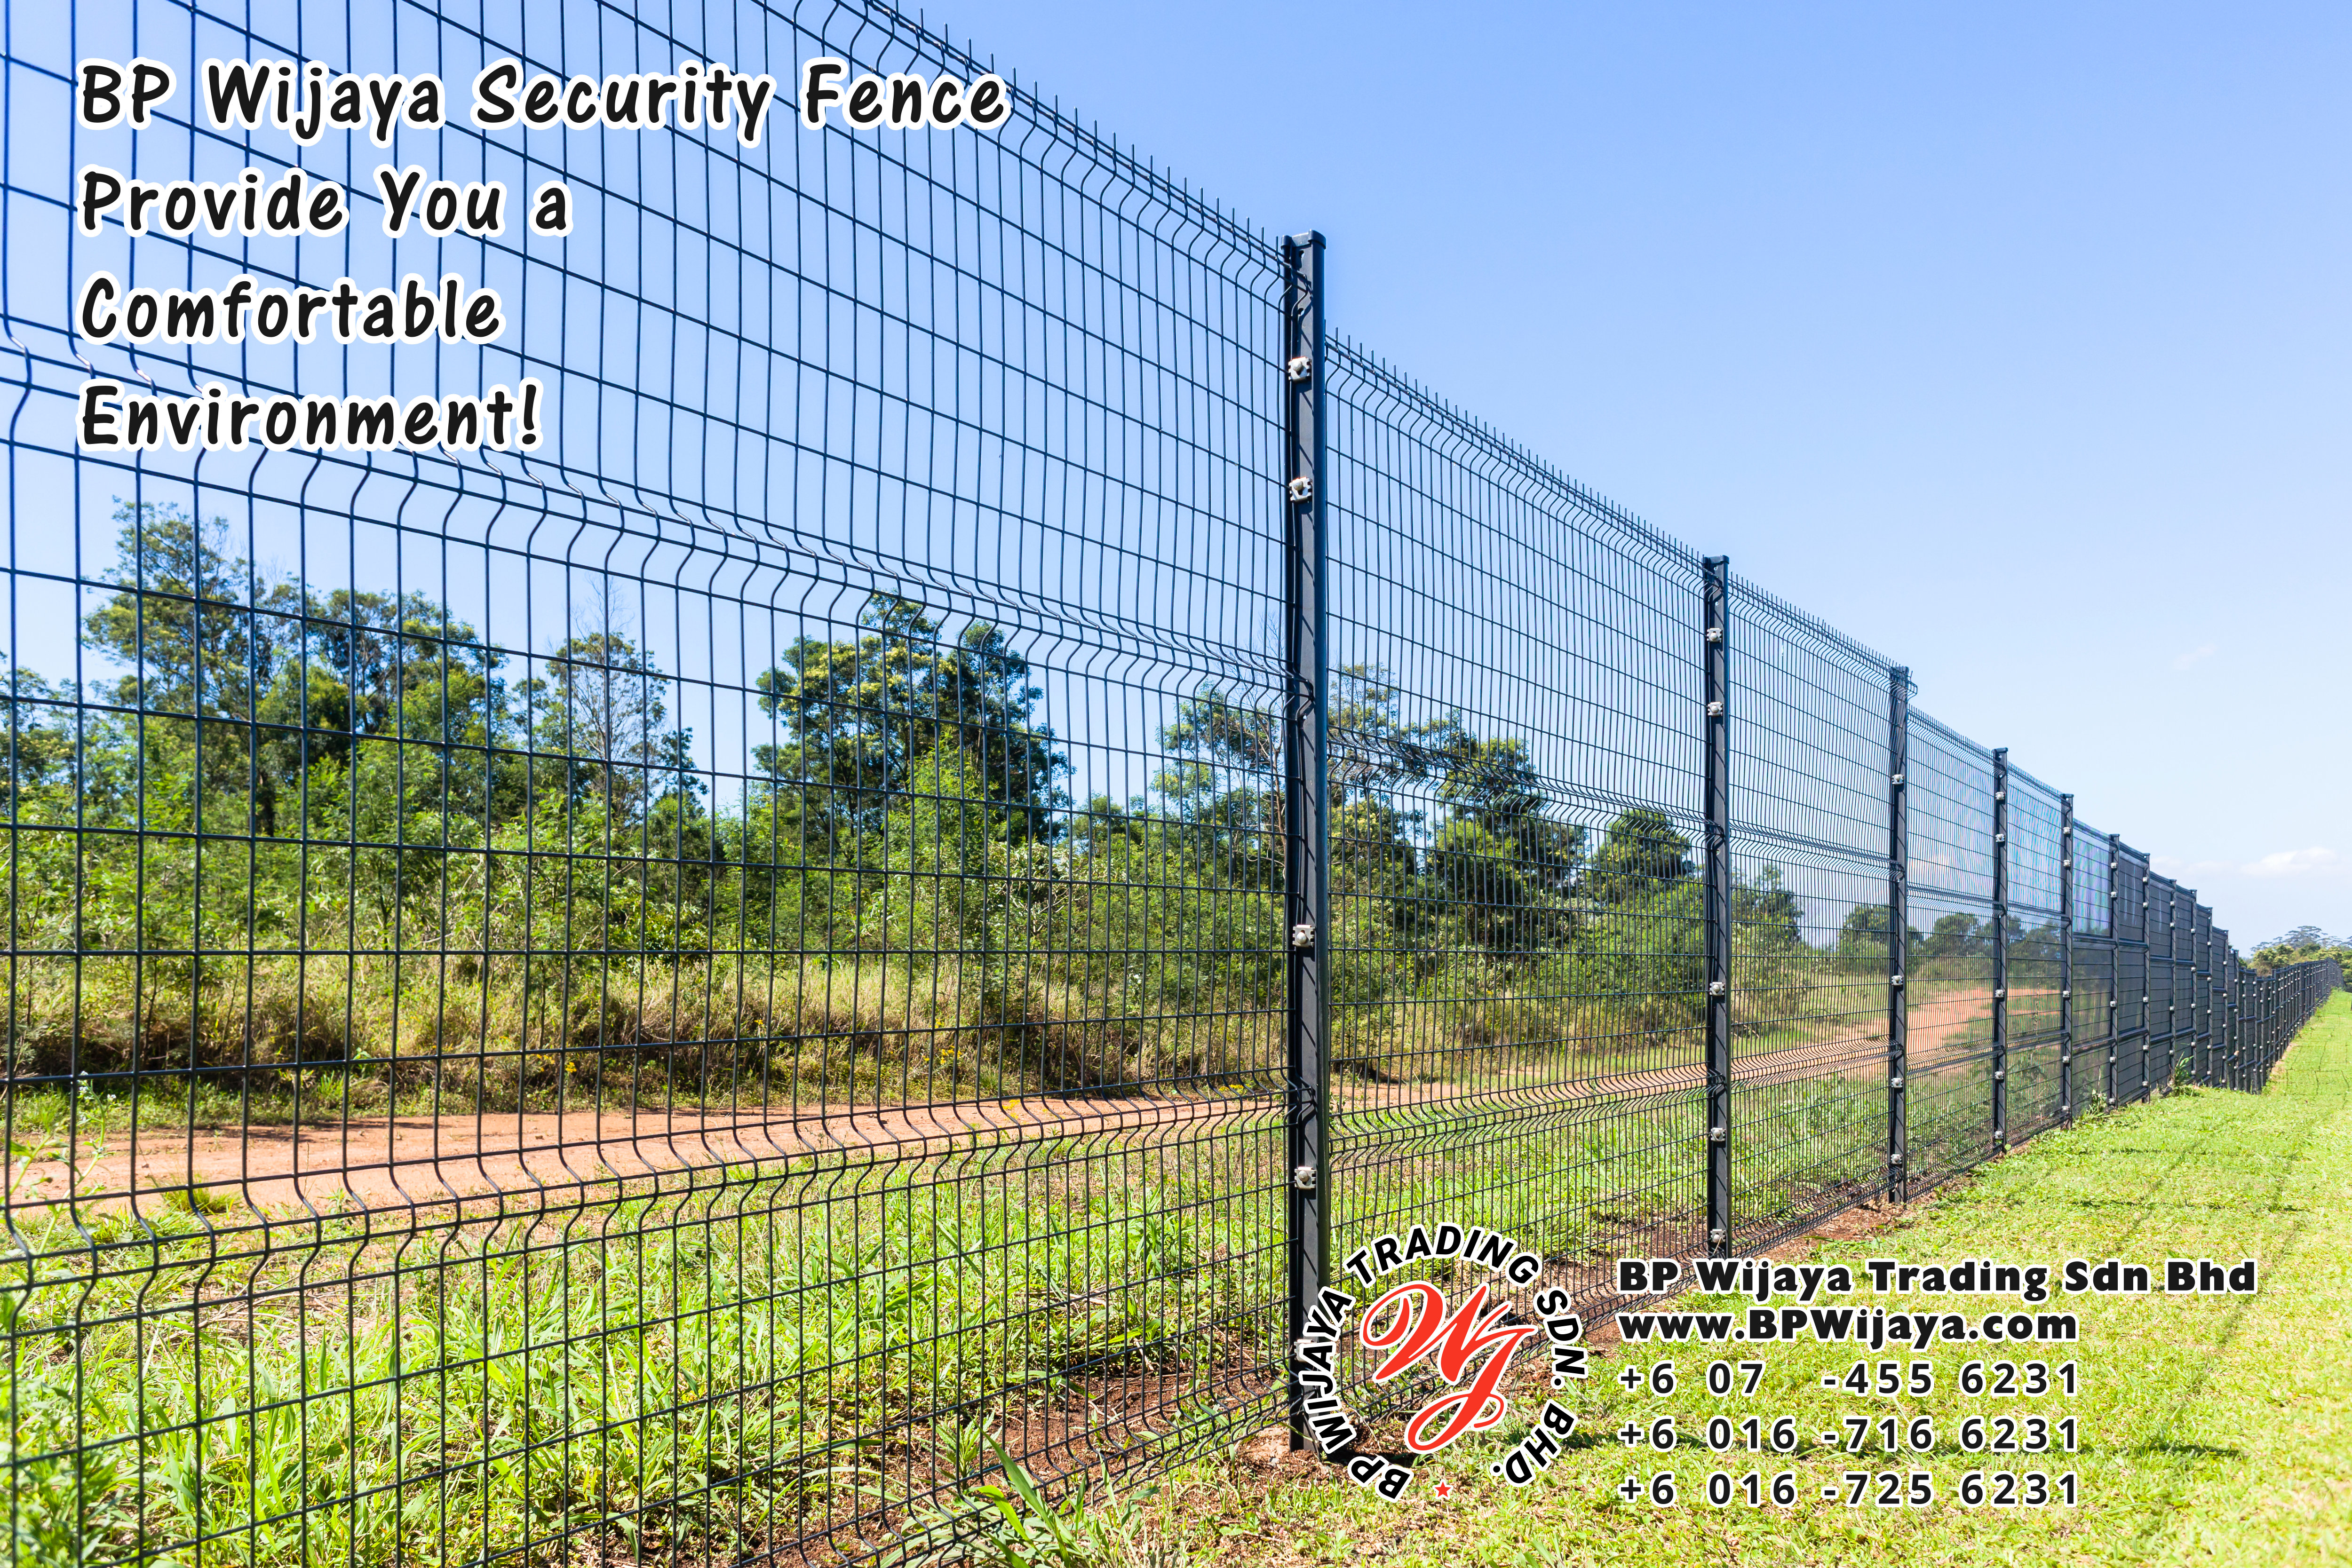 BP Wijaya Trading Sdn Bhd Malaysia Pahang Kuantan Temerloh Mentakab Manufacturer of Safety Fences Building Materials for Housing Construction Site Industial Security Fencing Factory A01-64